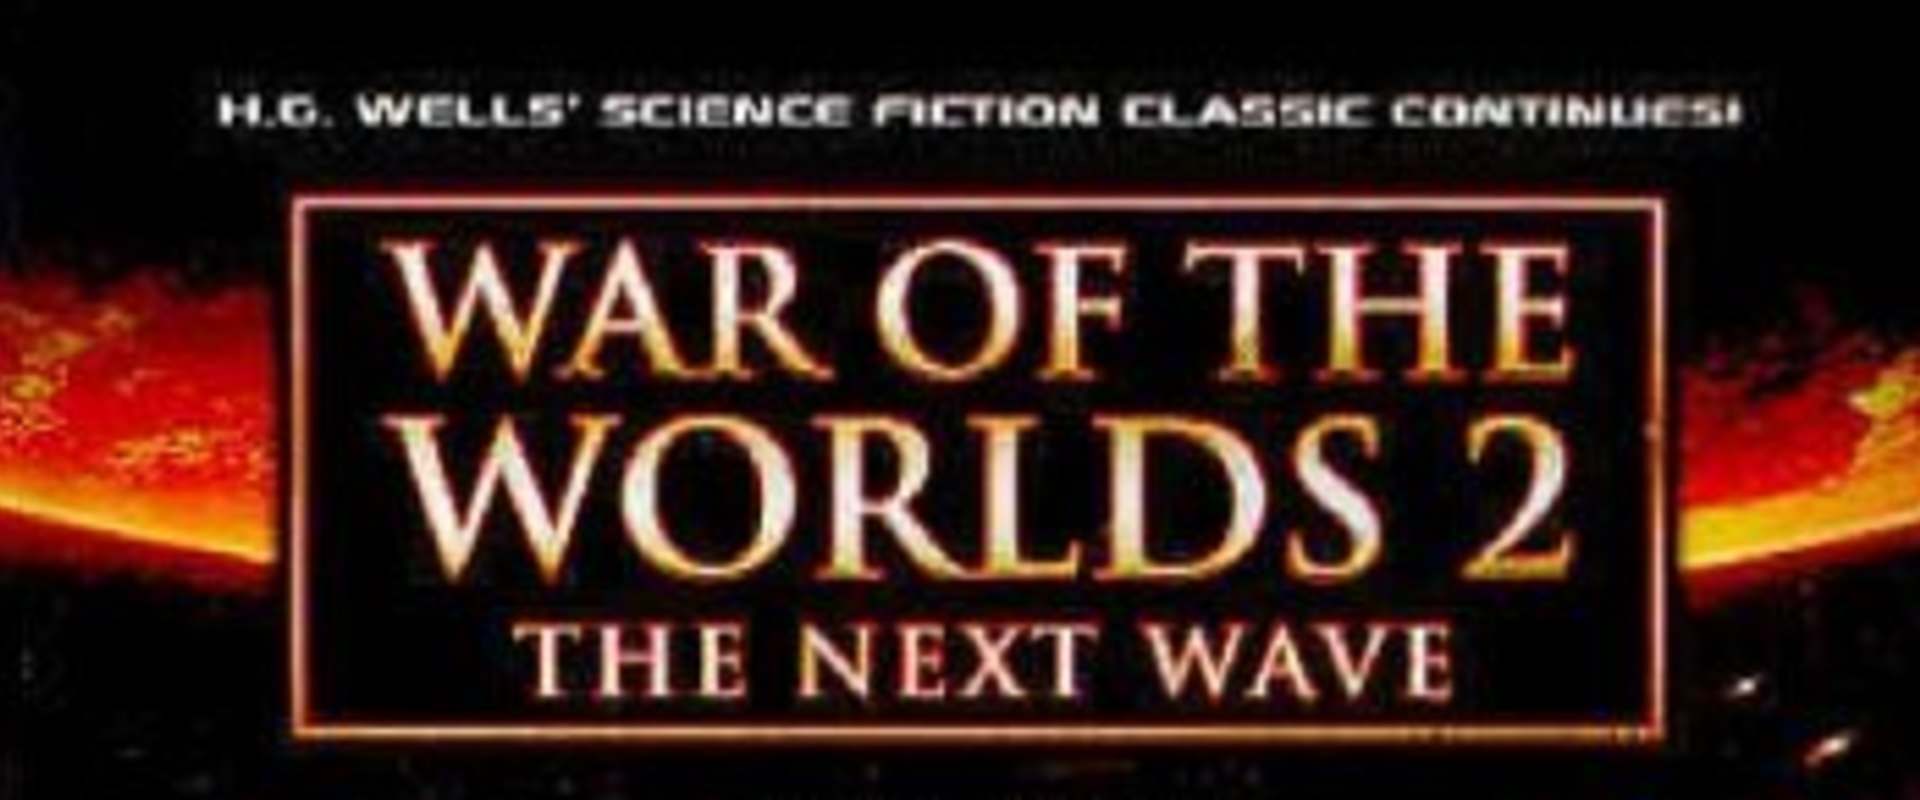 War of the Worlds 2: The Next Wave background 1